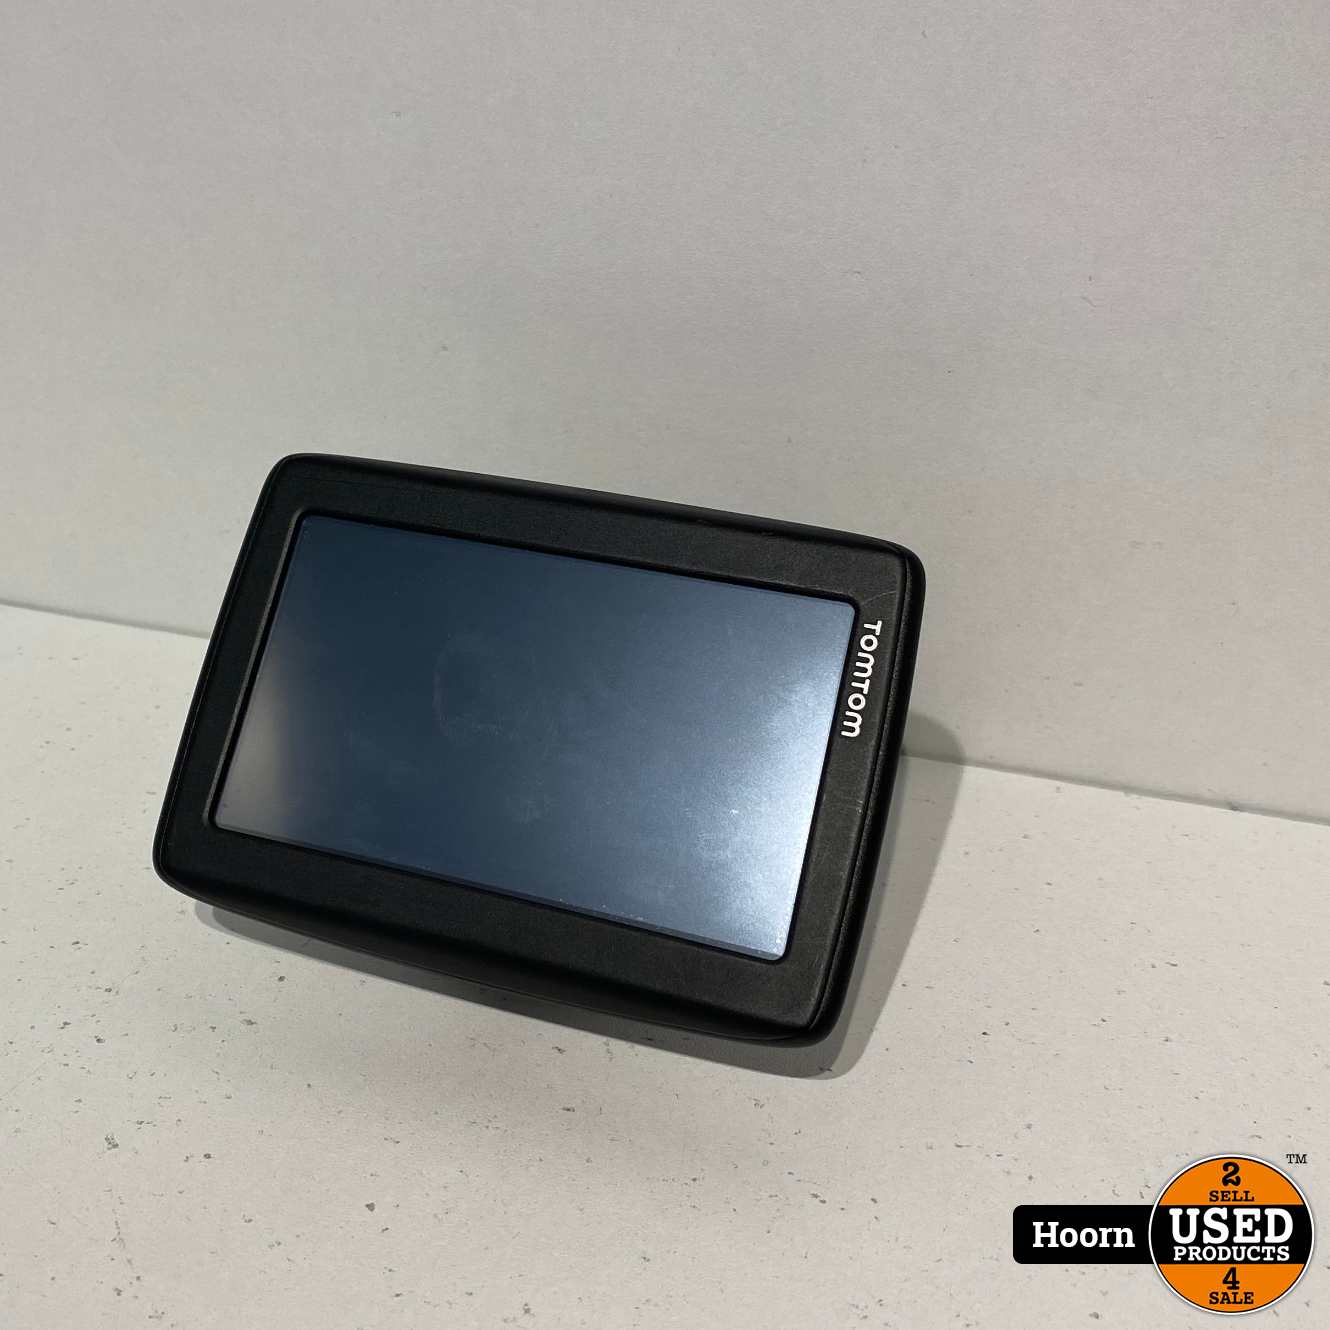 TOMTOM incl. Lader West Europa - Used Hoorn